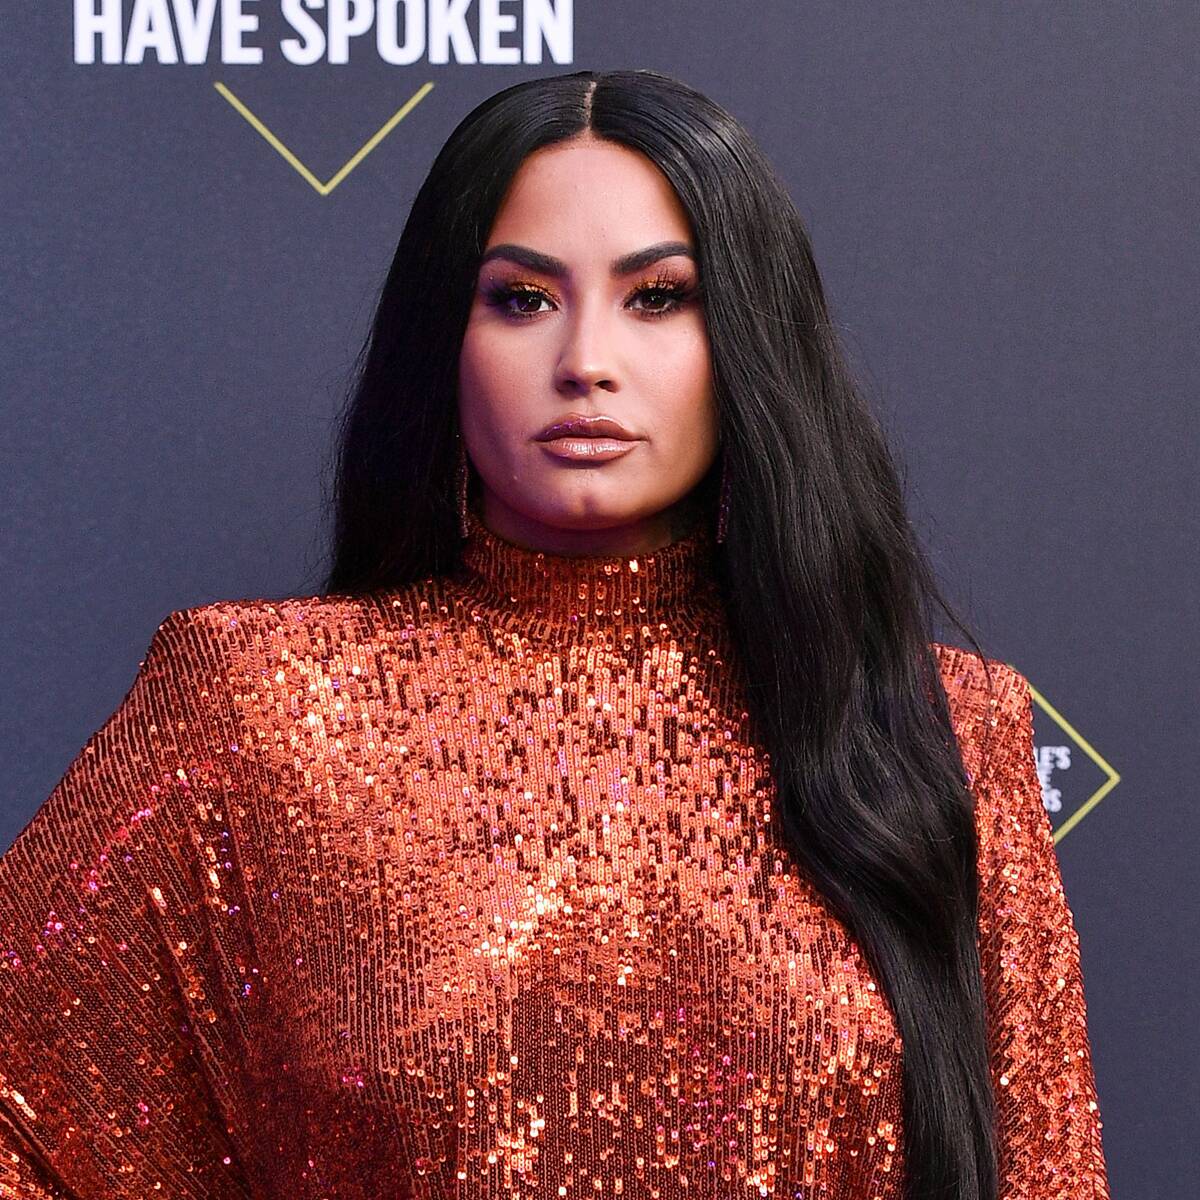 Demi Lovato To Star In NBC Comedy About Friends With Food Issues